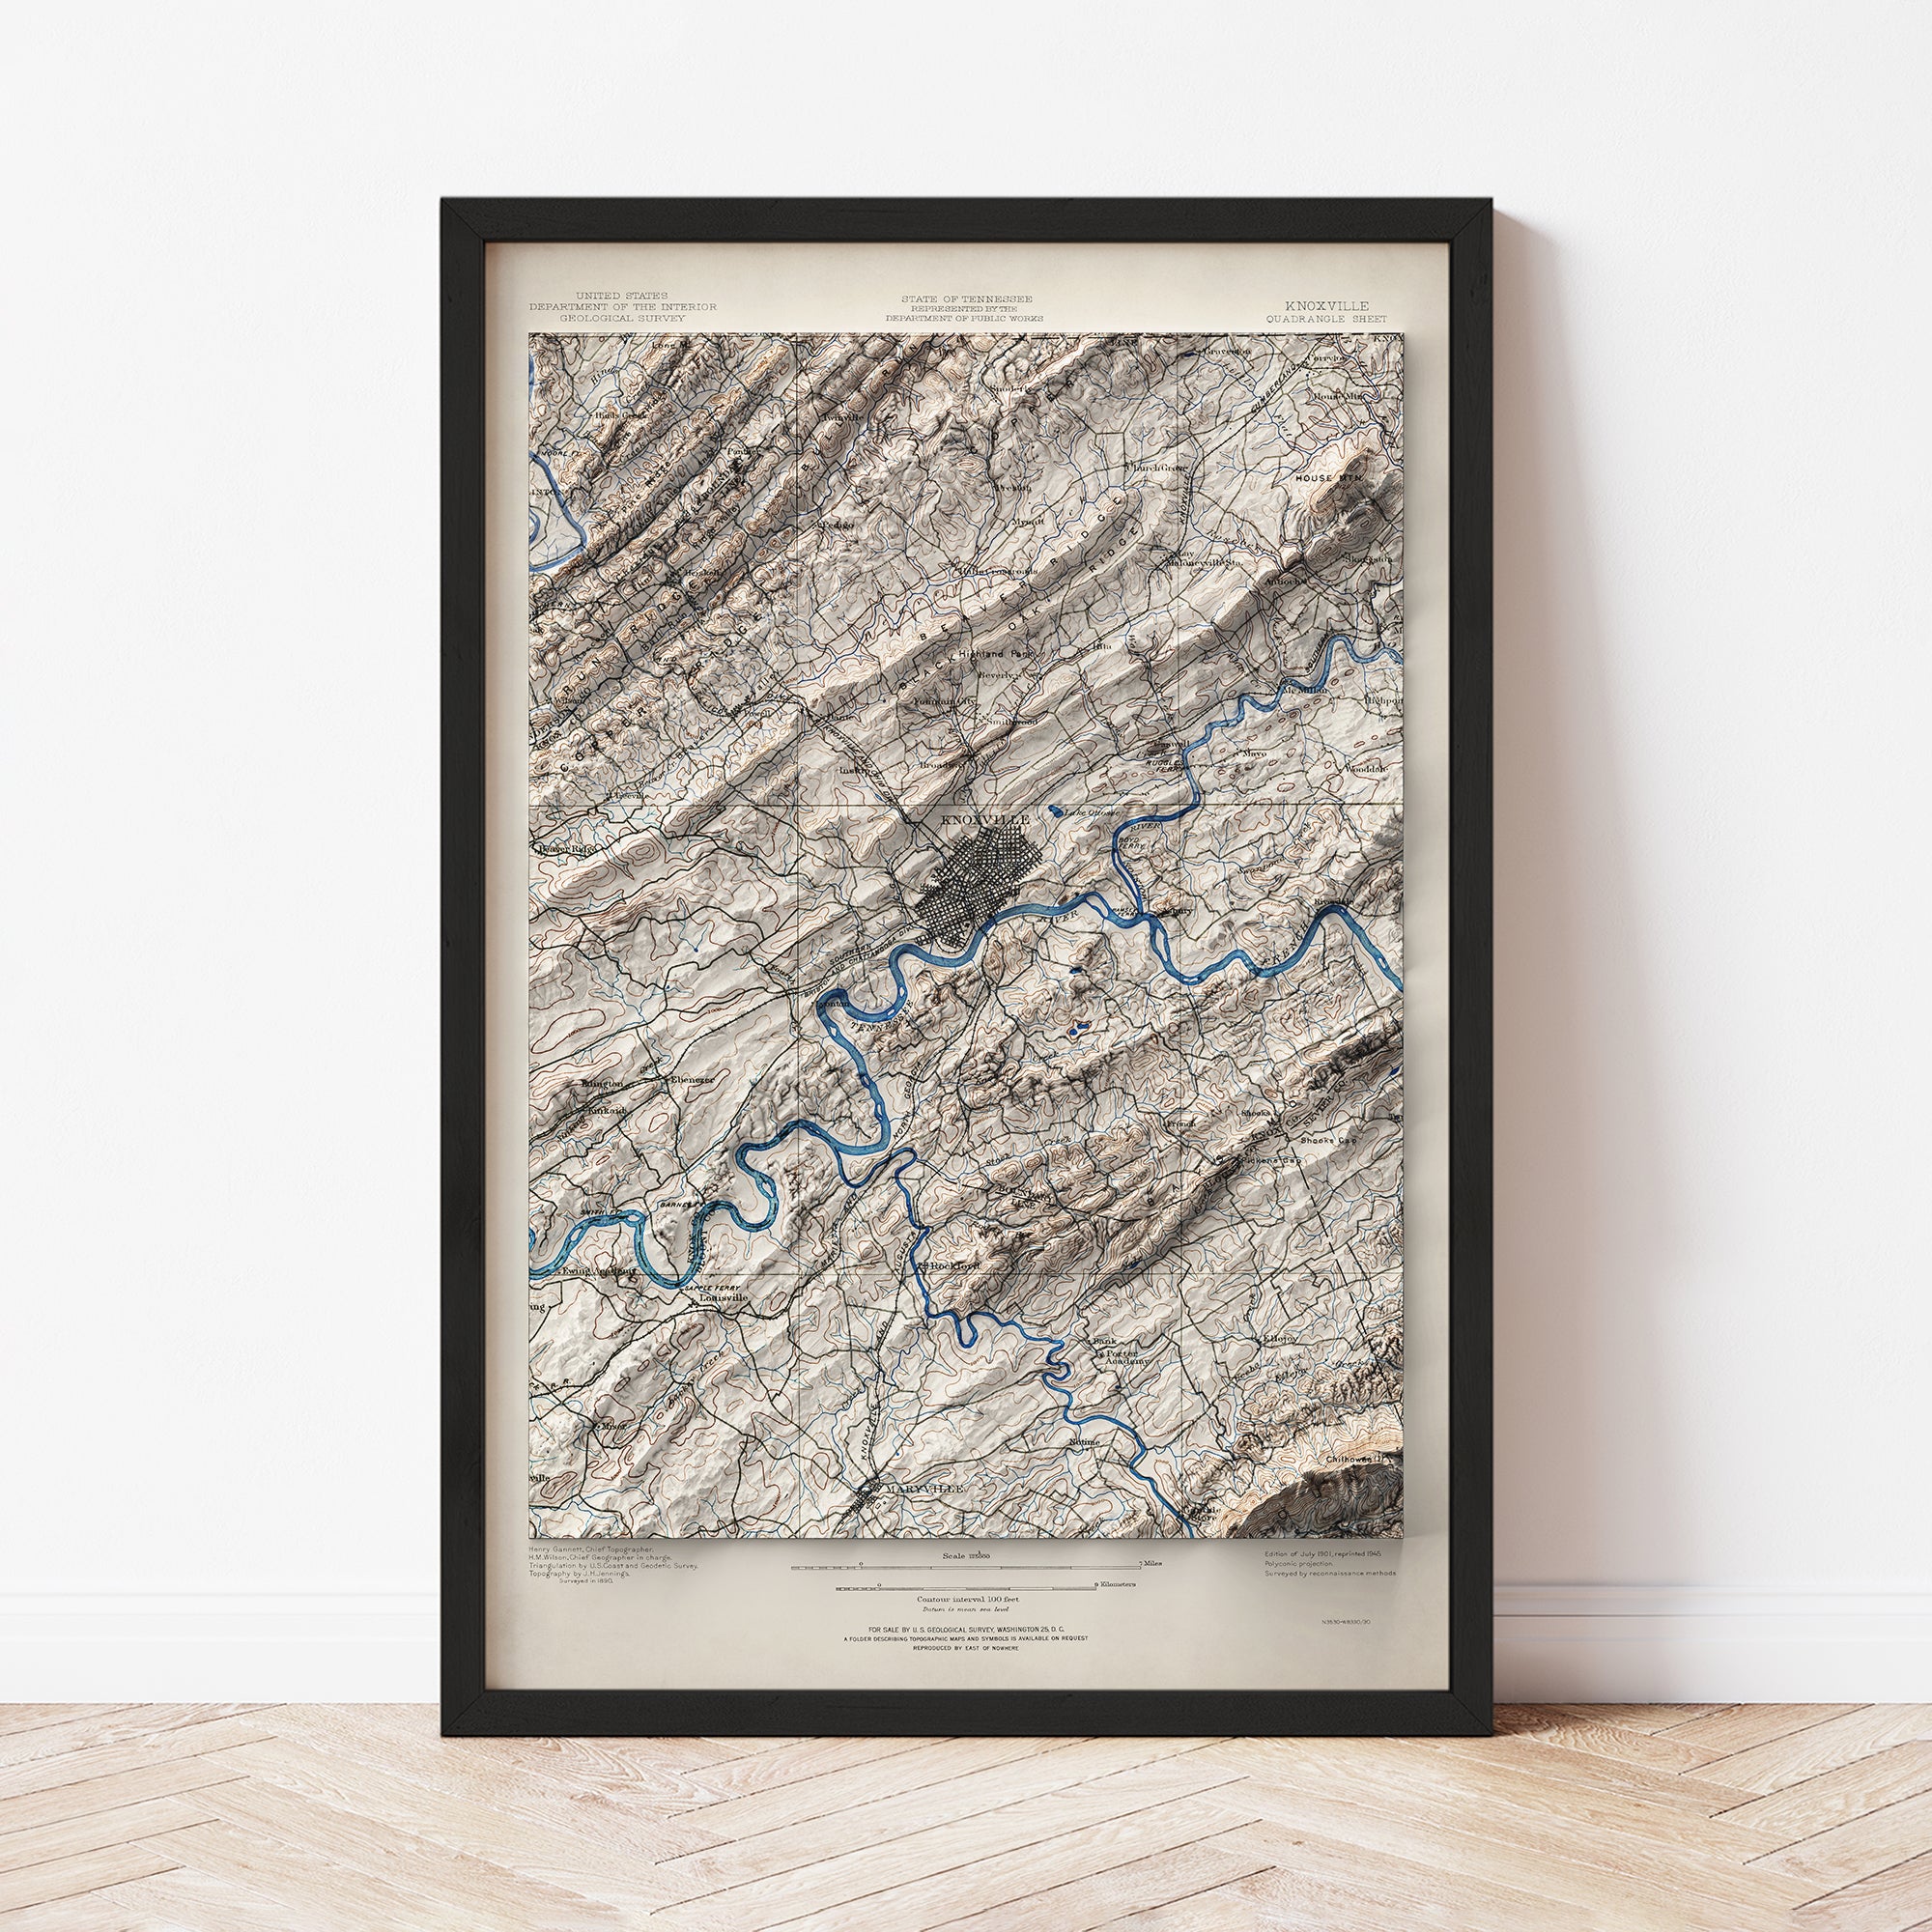 Knoxville, TN - Vintage Shaded Relief Map (1901)